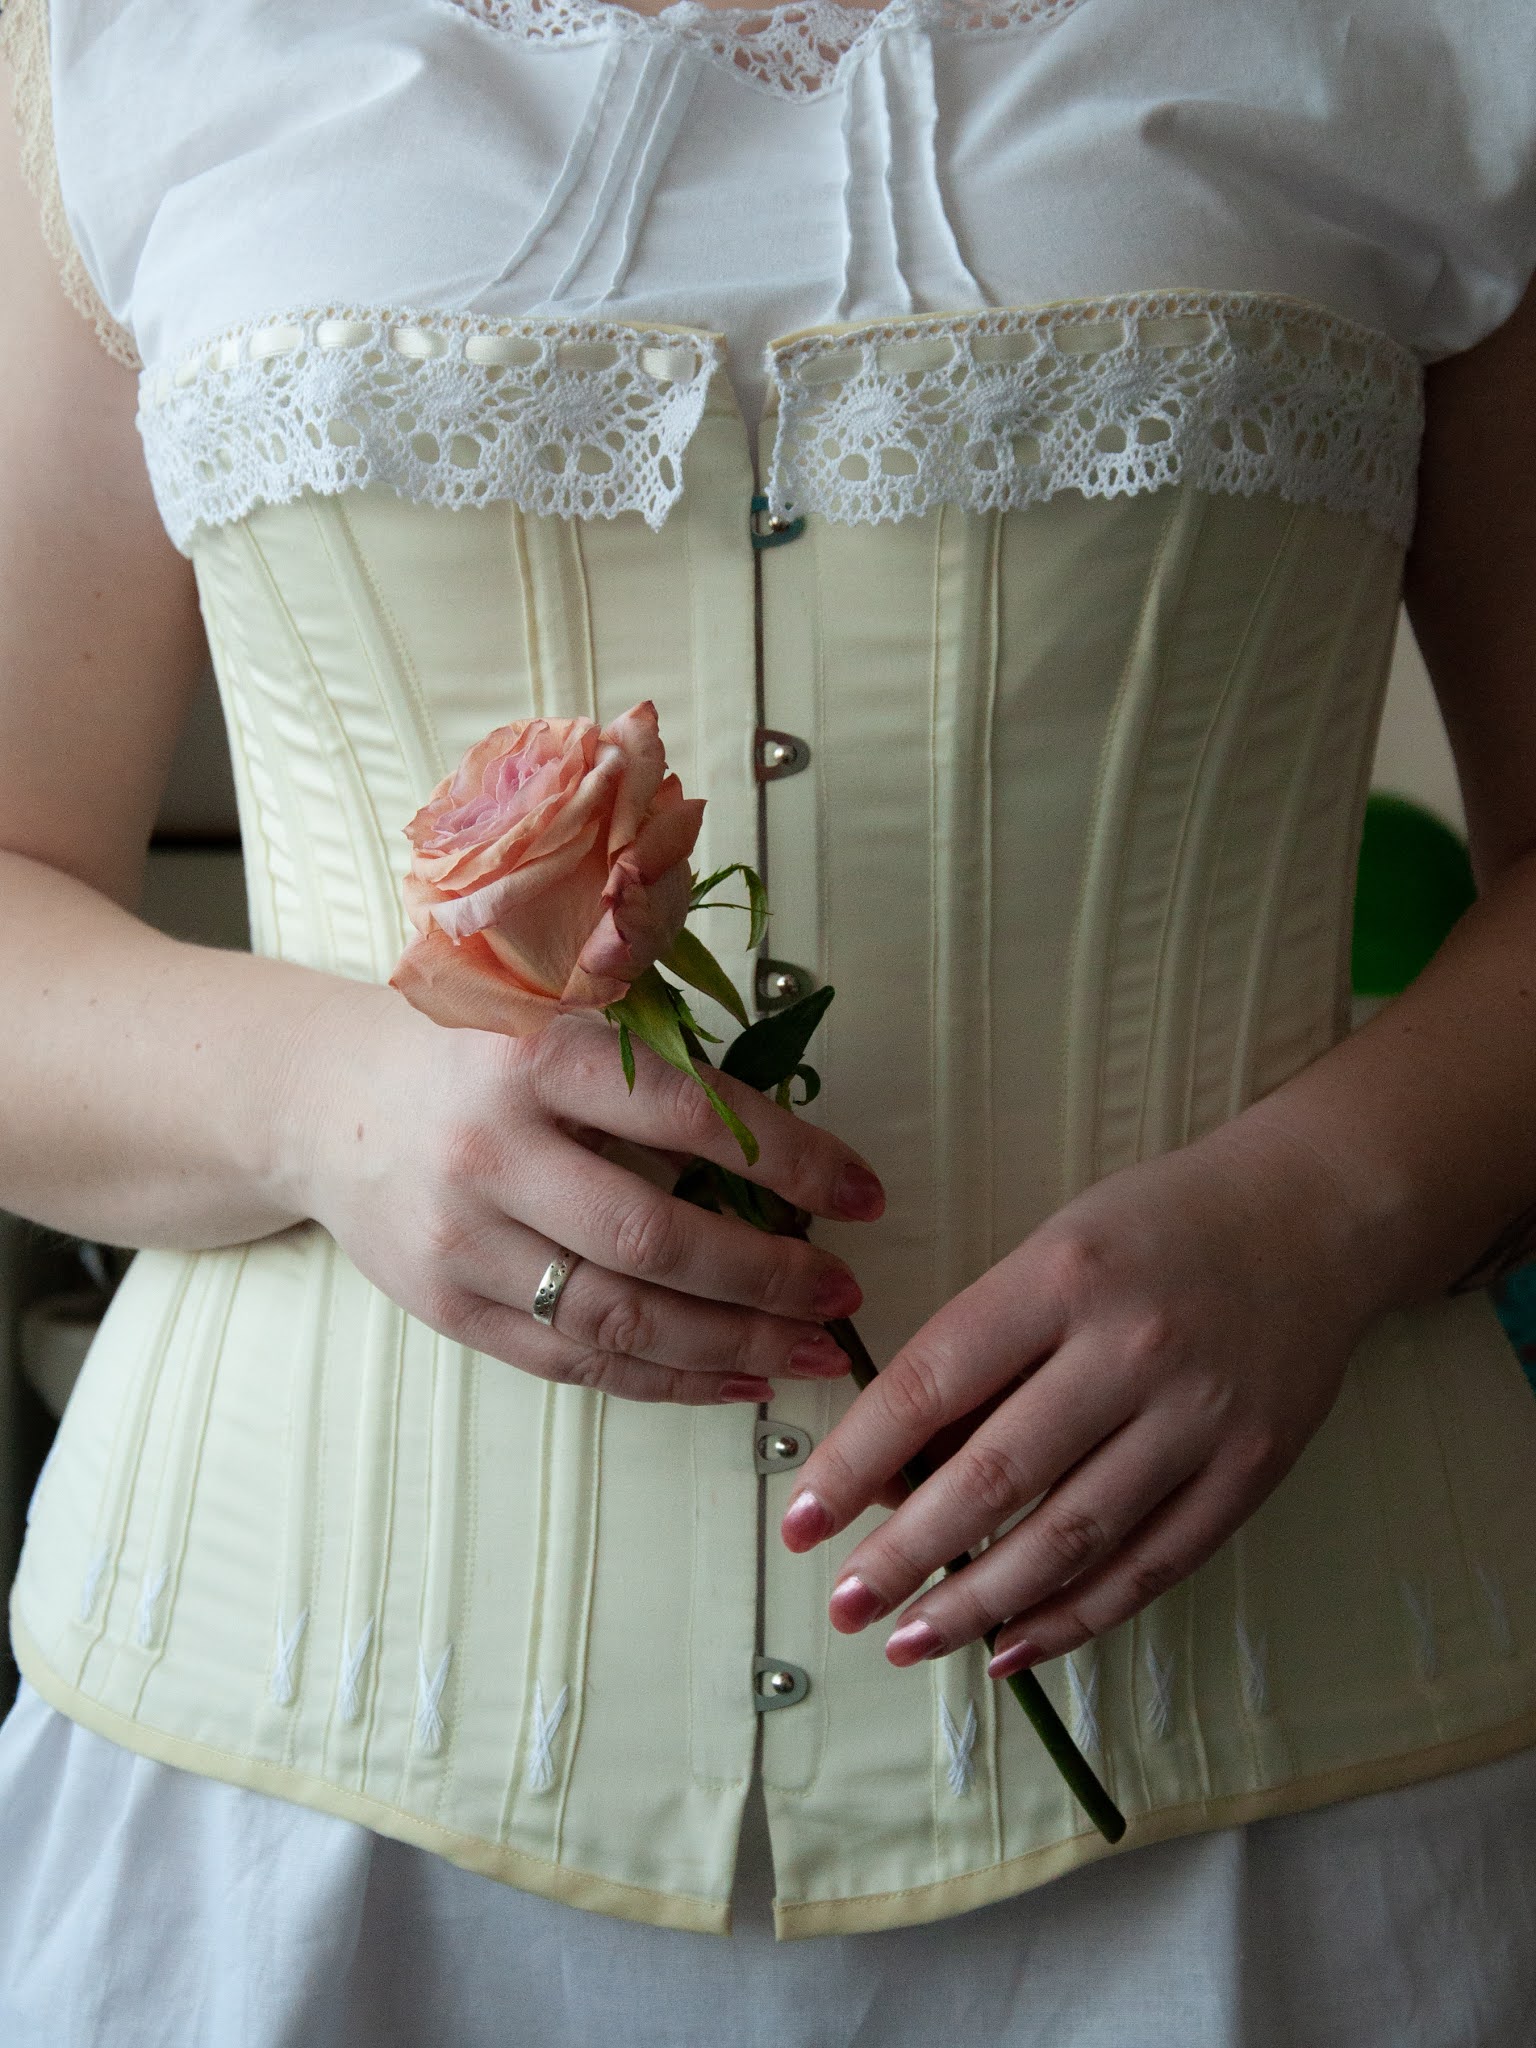 How To Make a Victorian Corset  Pattern and Sewing Tutorial 